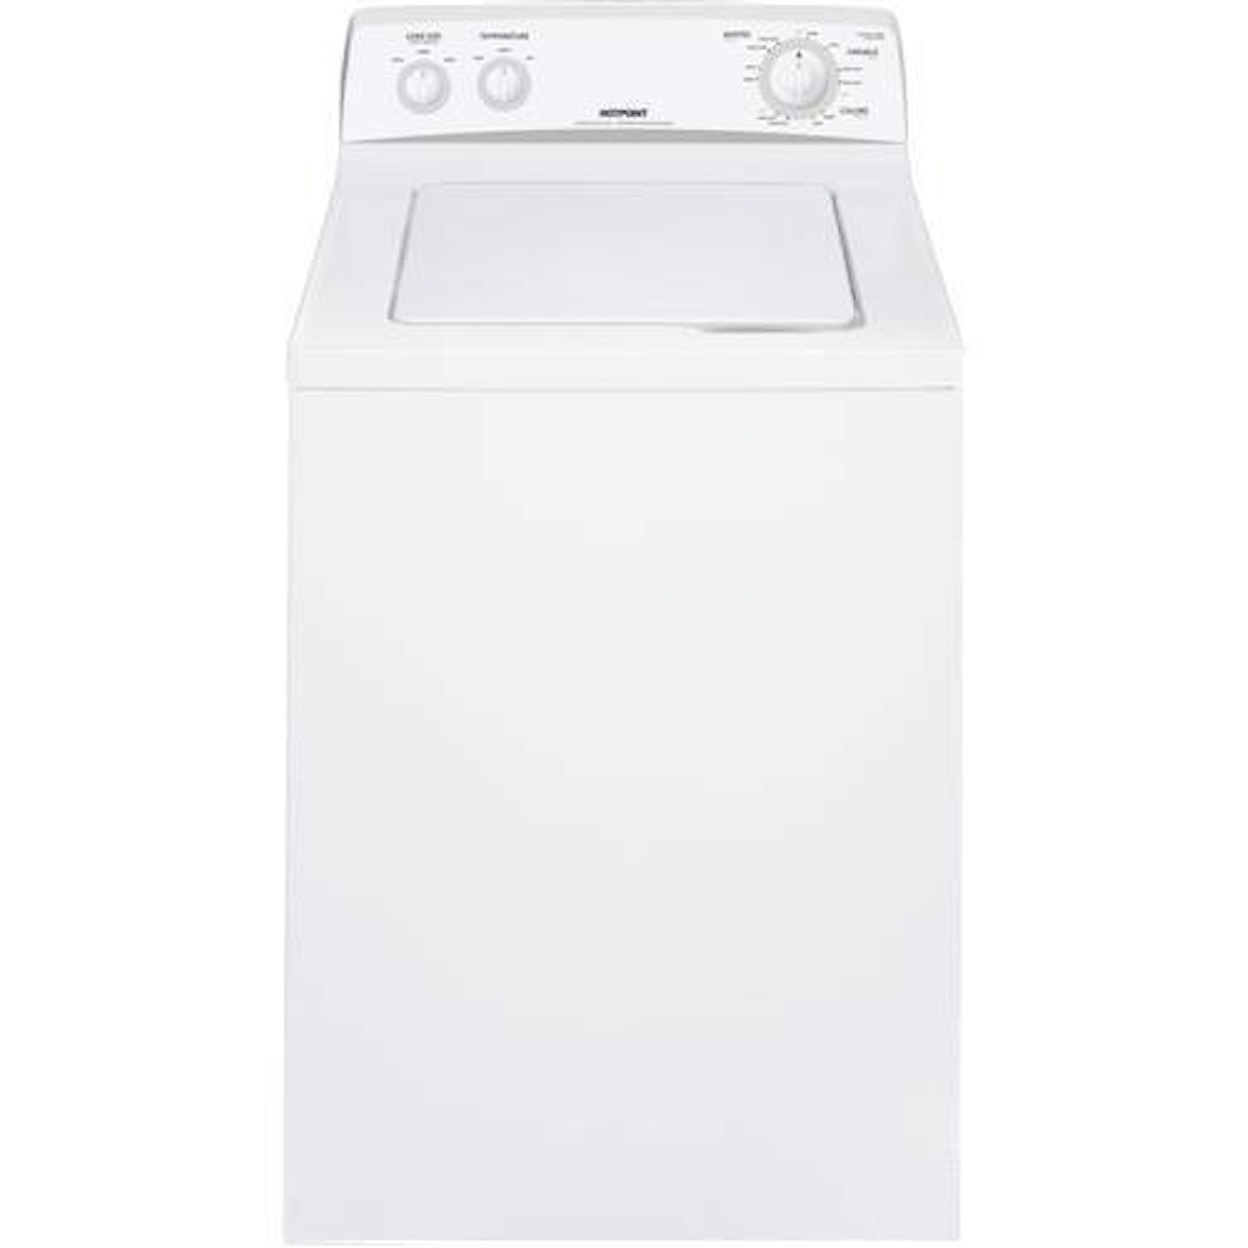 Hotpoint Washers 3.5 Cu. Ft. Top-Load Washer